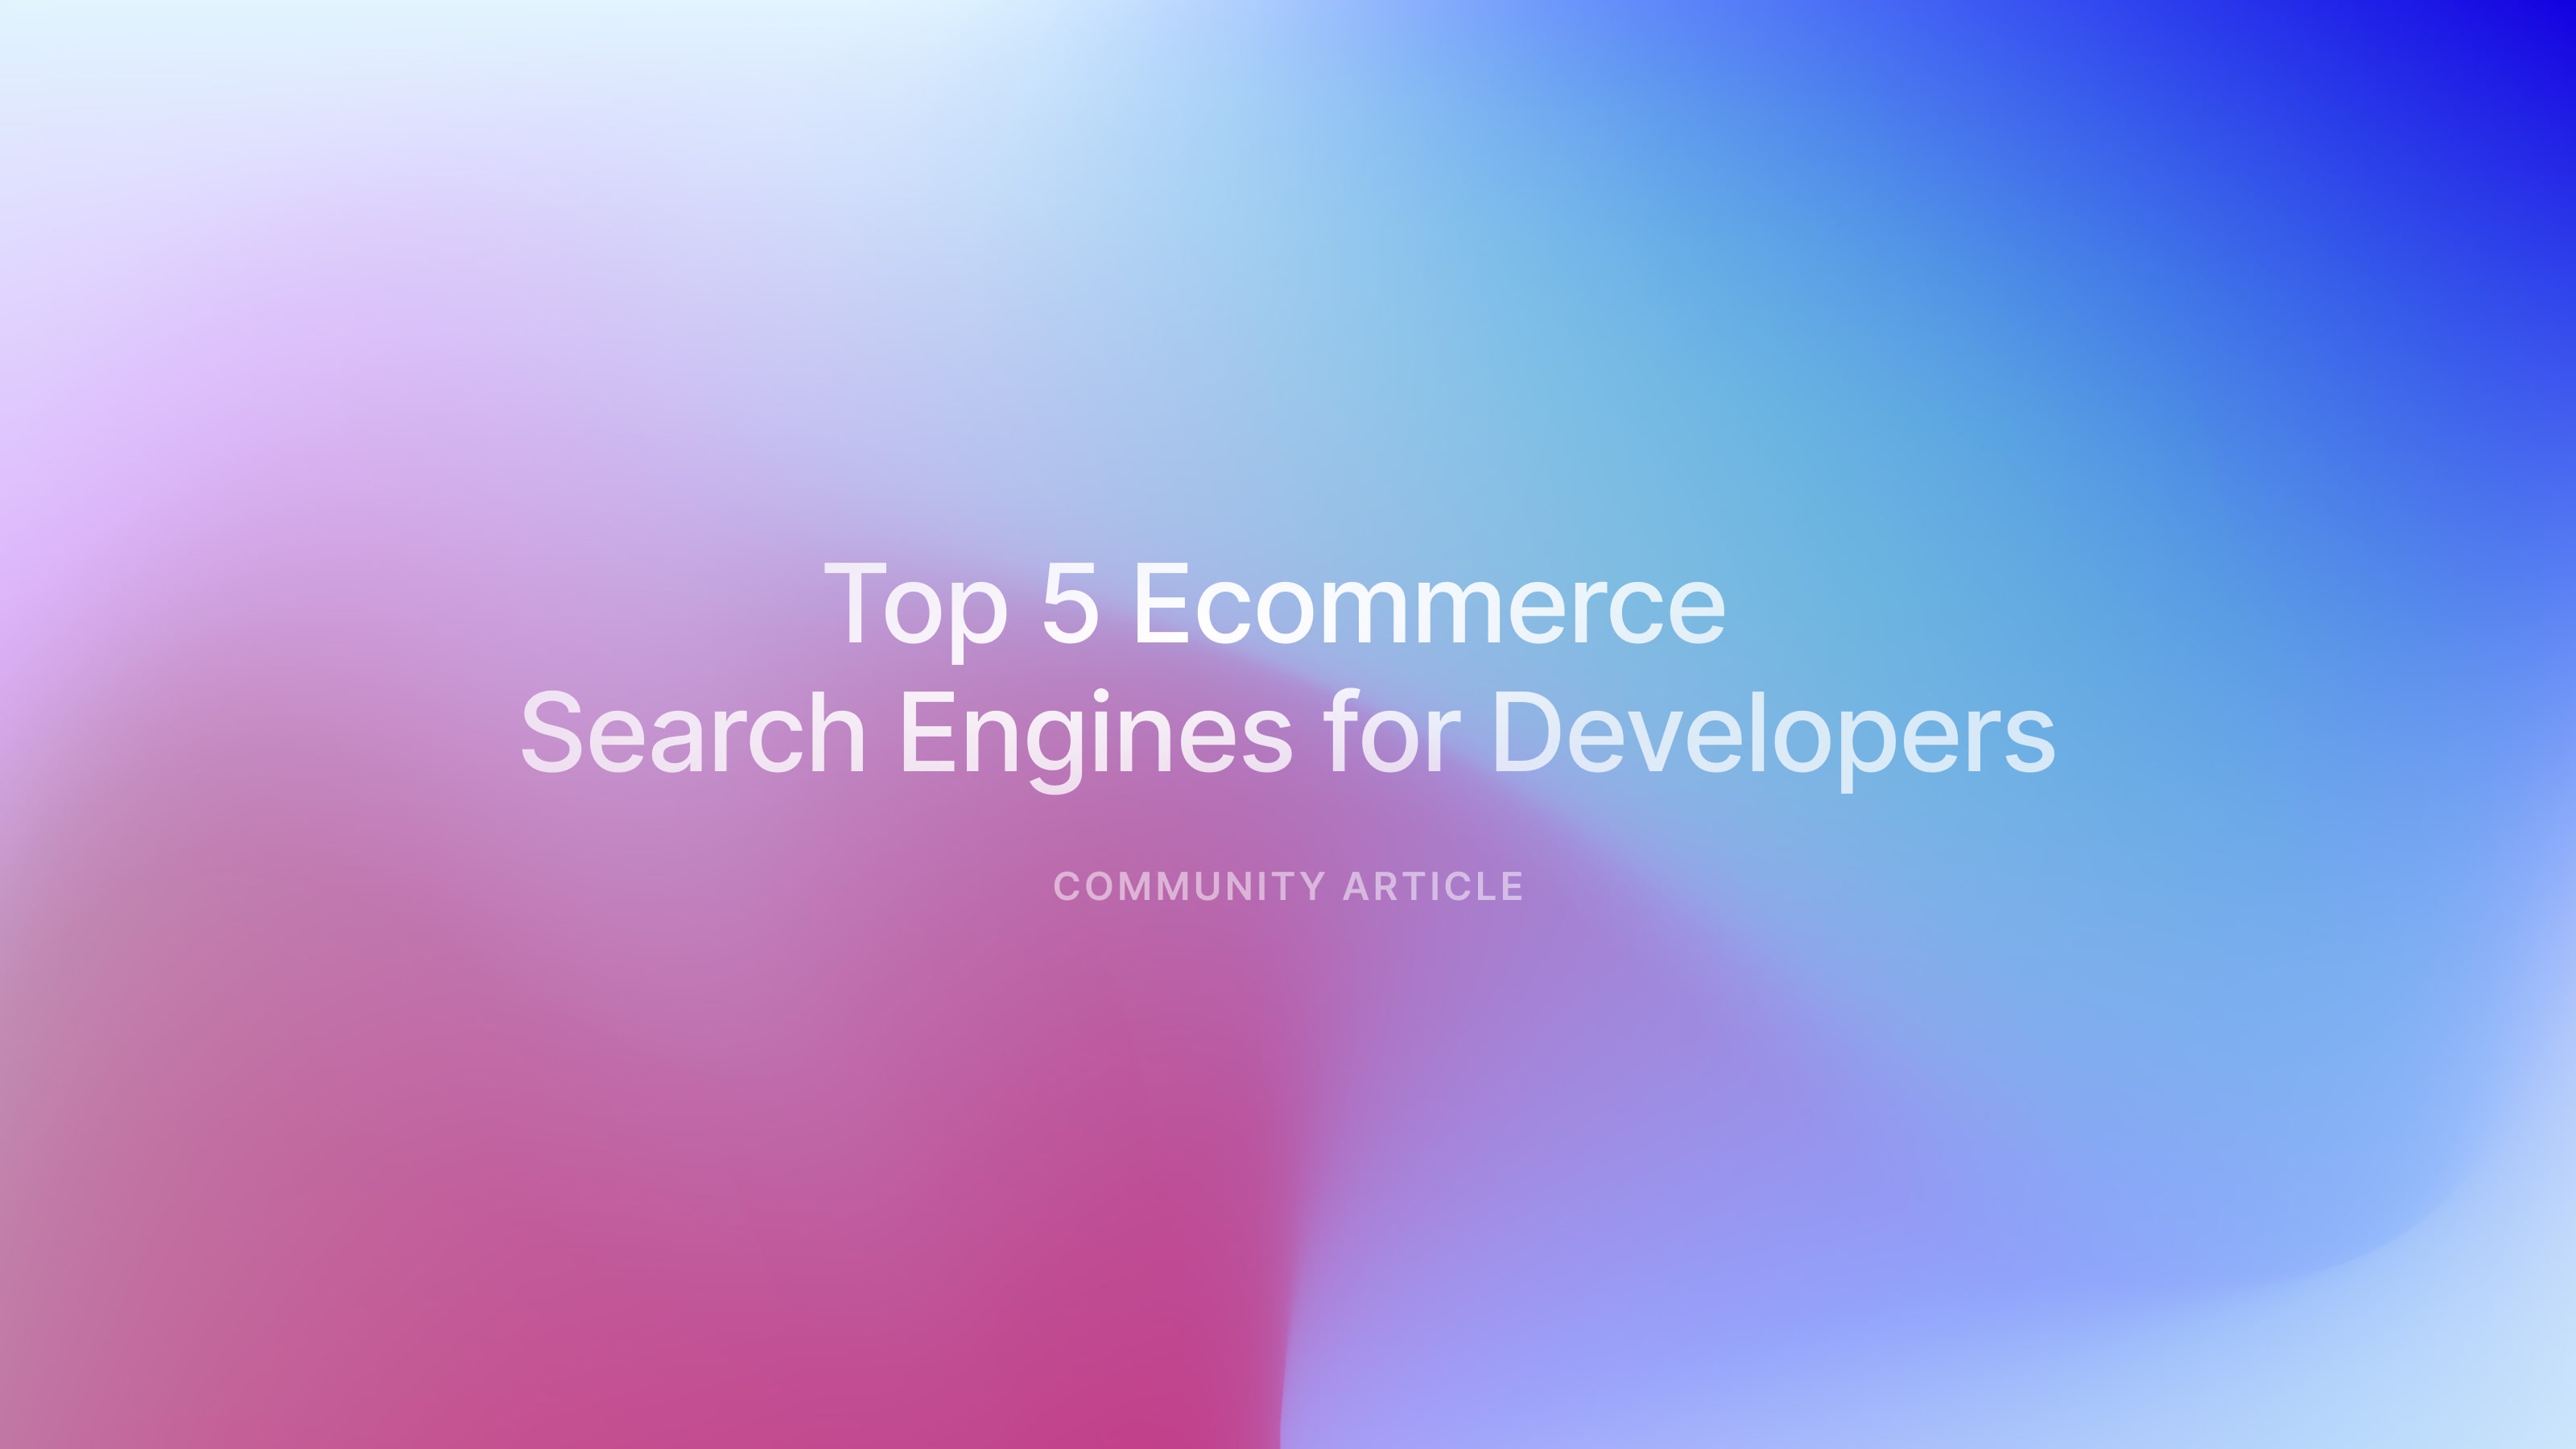 Top 5 Ecommerce Search Engines for Developers